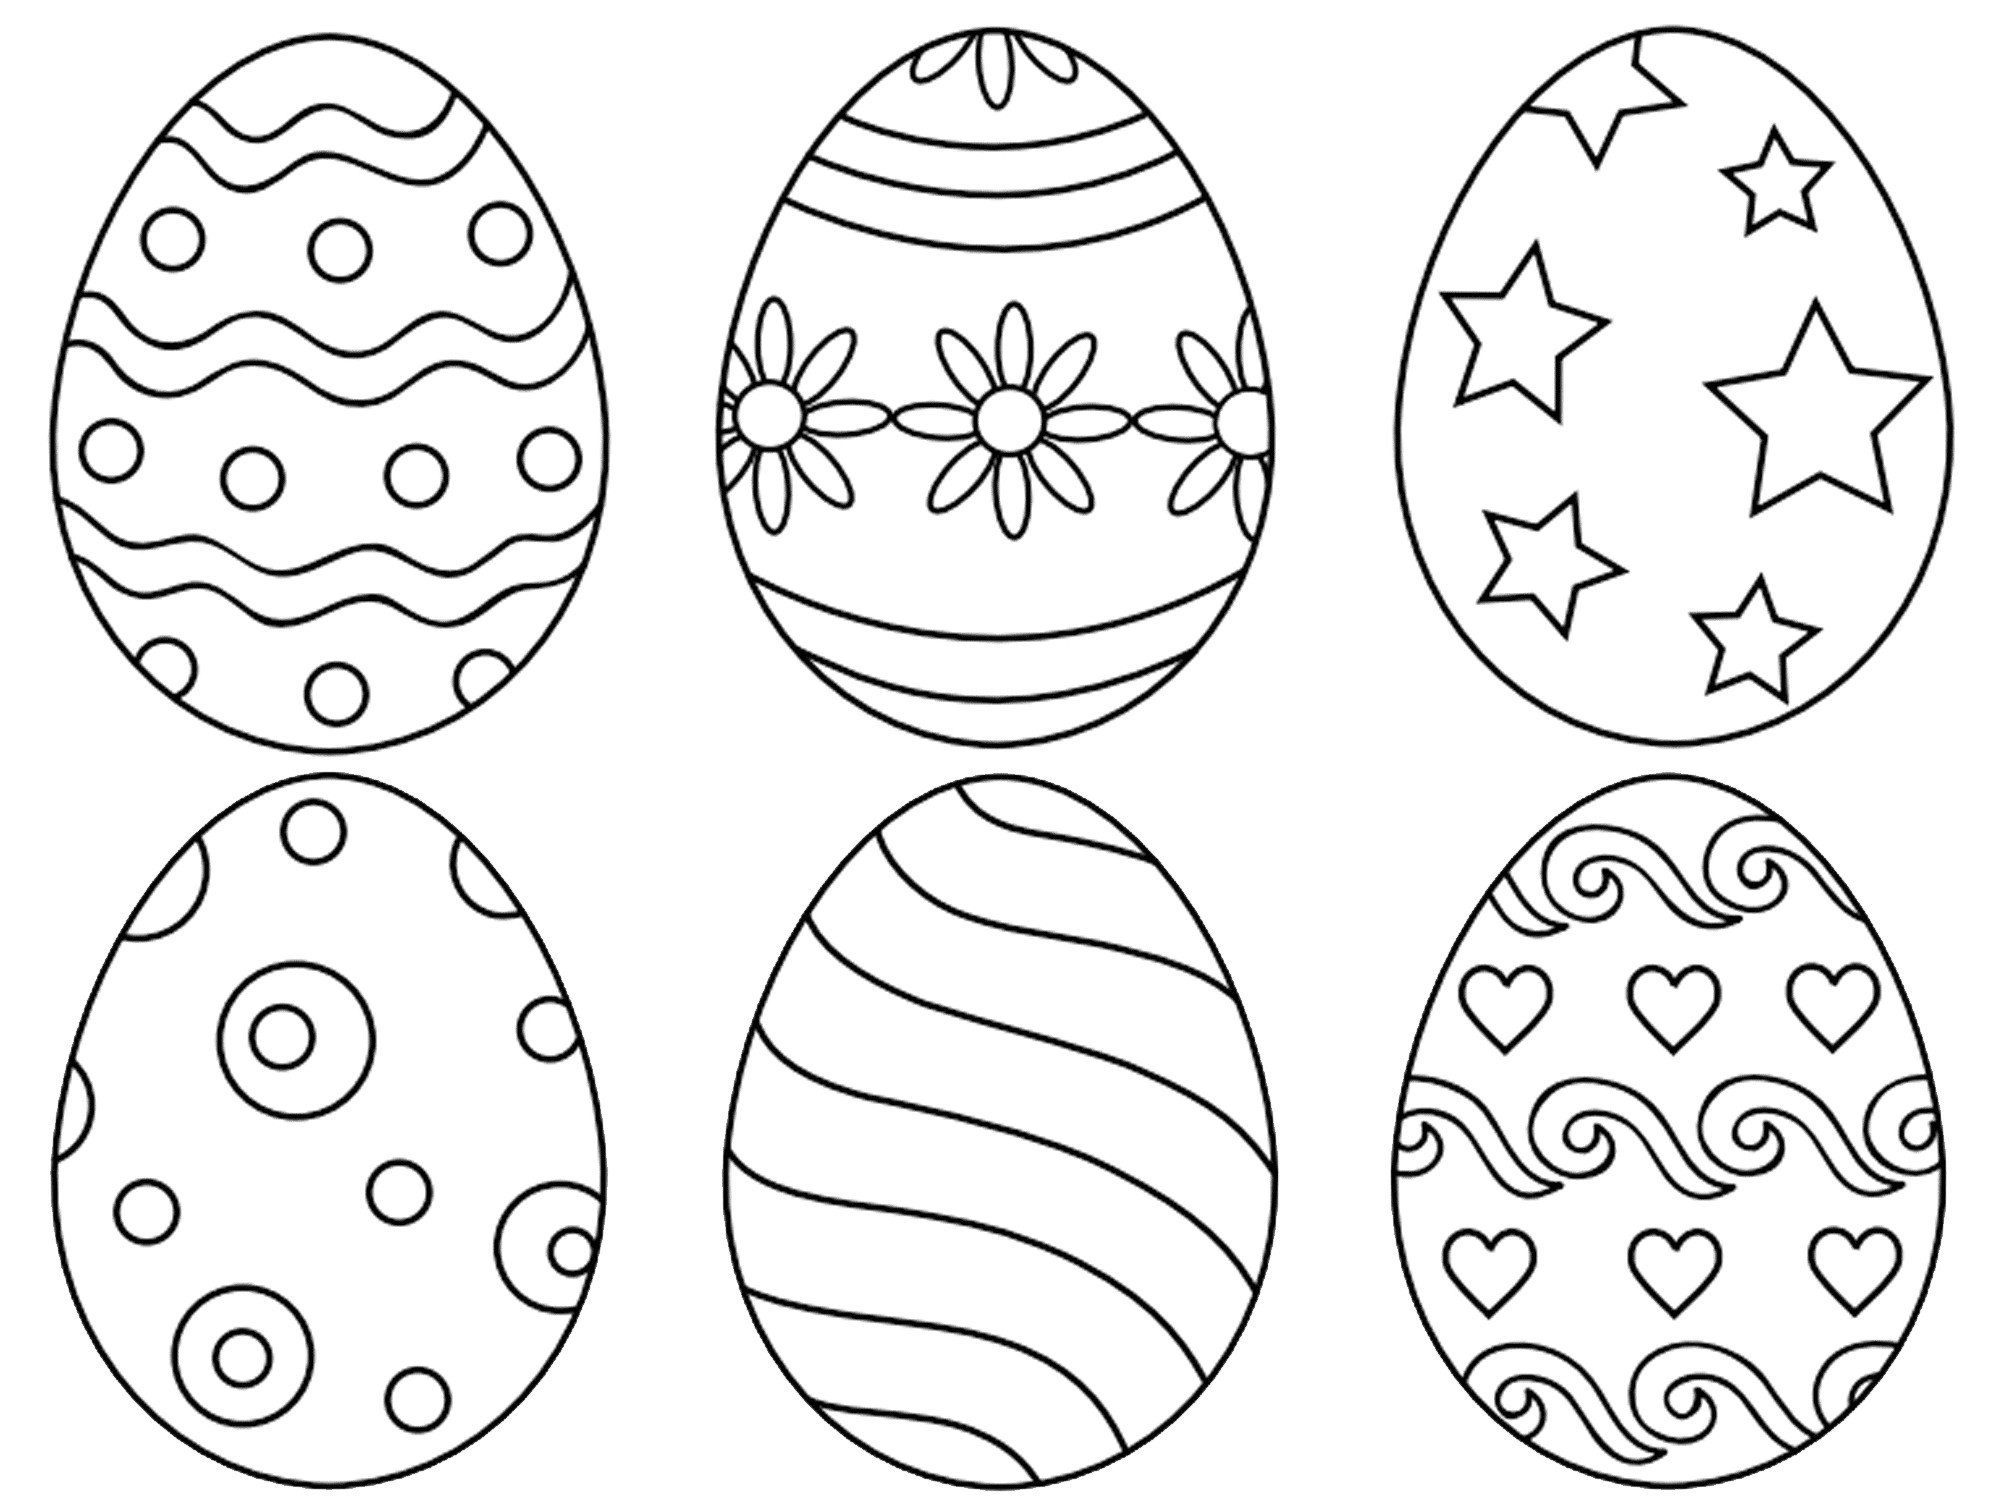 Egg Coloring Pages
 Cartoon Easter Eggs Clip Art Coloring Pages in